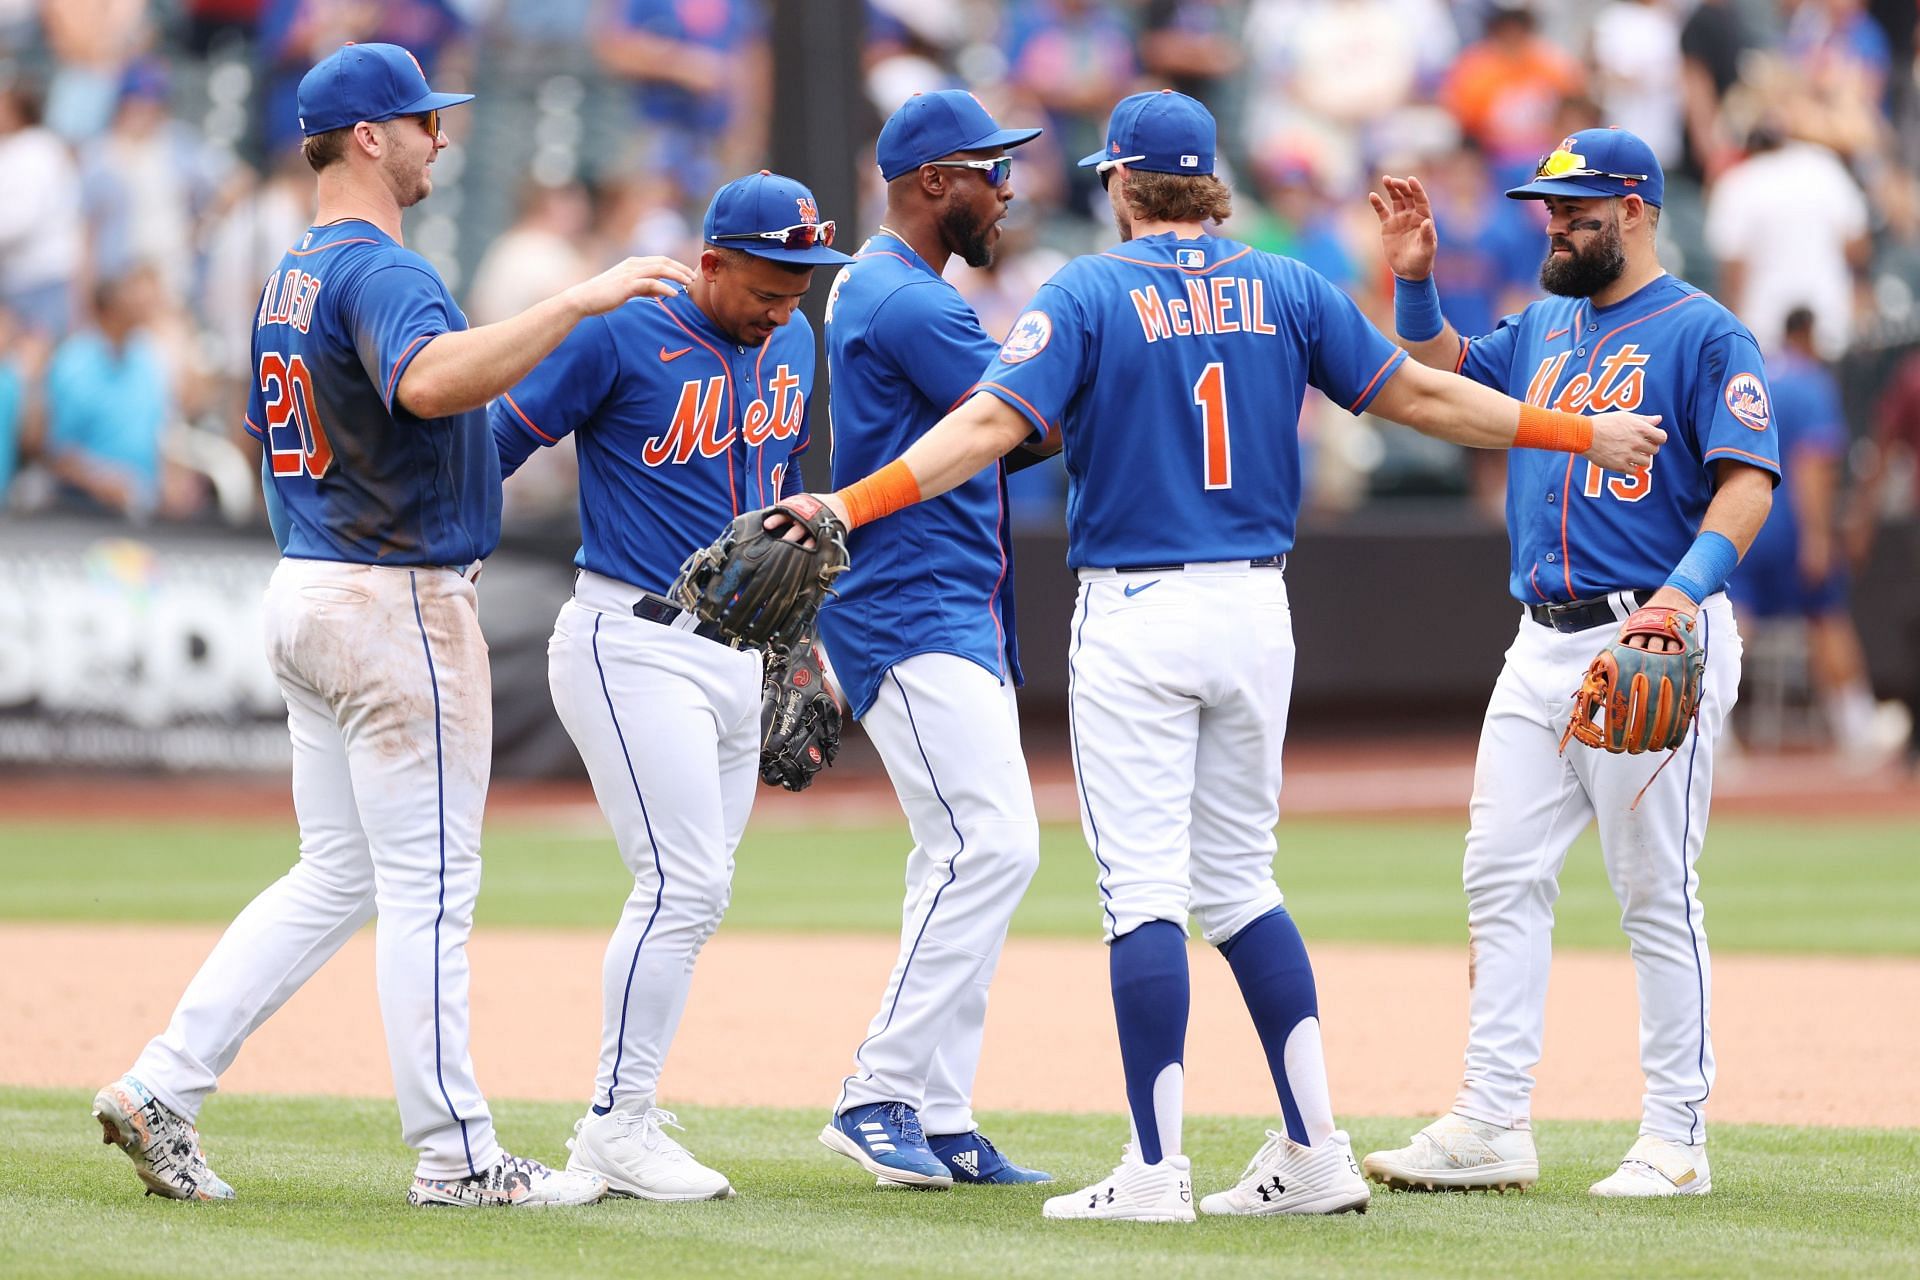 MLB: New York Mets players celebrate their victory over the Cincinnati Reds. The Mets won convincingly by a score of 10-2.